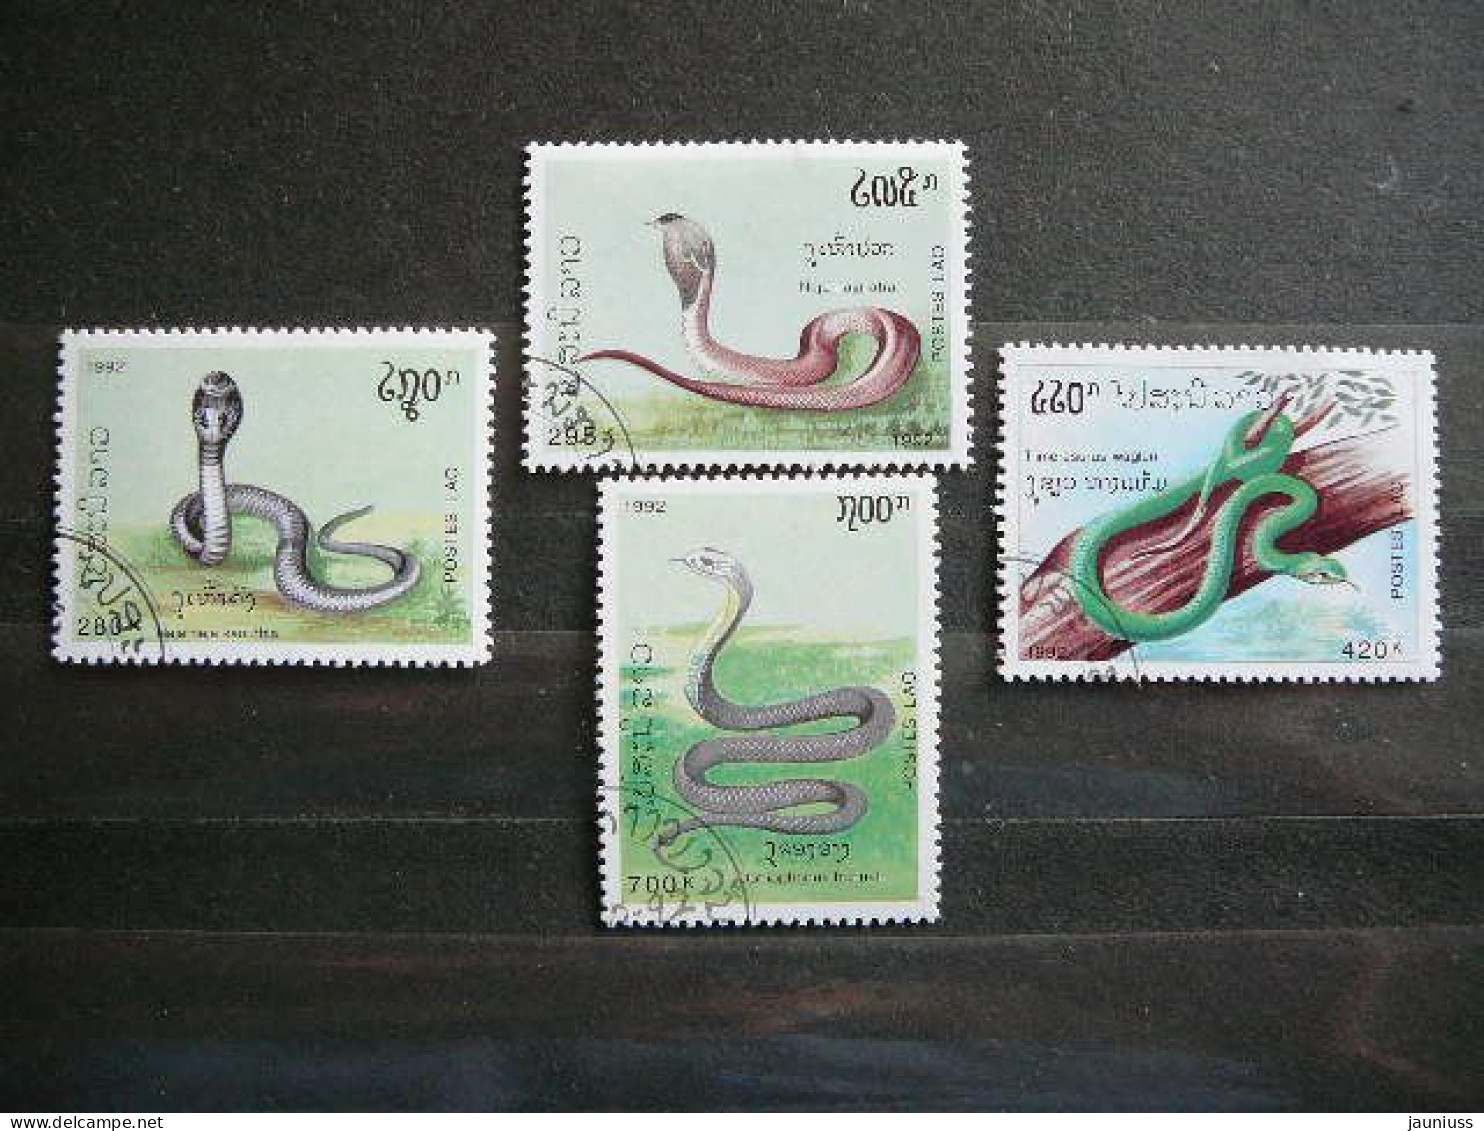 Snakes Reptiles # Lao 1992 Used #1312  Laos - Serpents